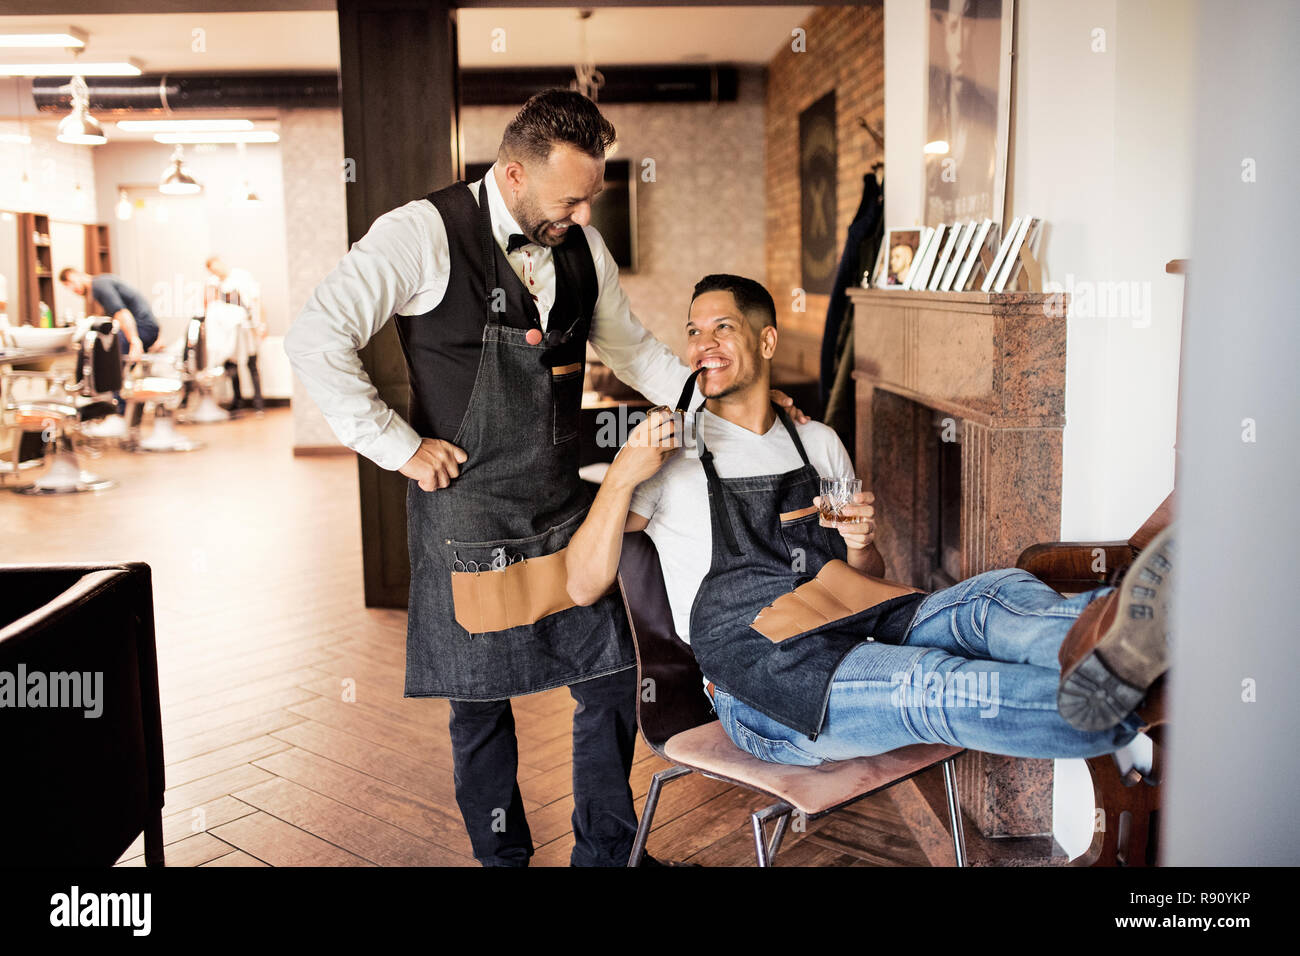 Two cheerful haidresser and hairstylist in barber shop, smoking a pipe and talking. Stock Photo